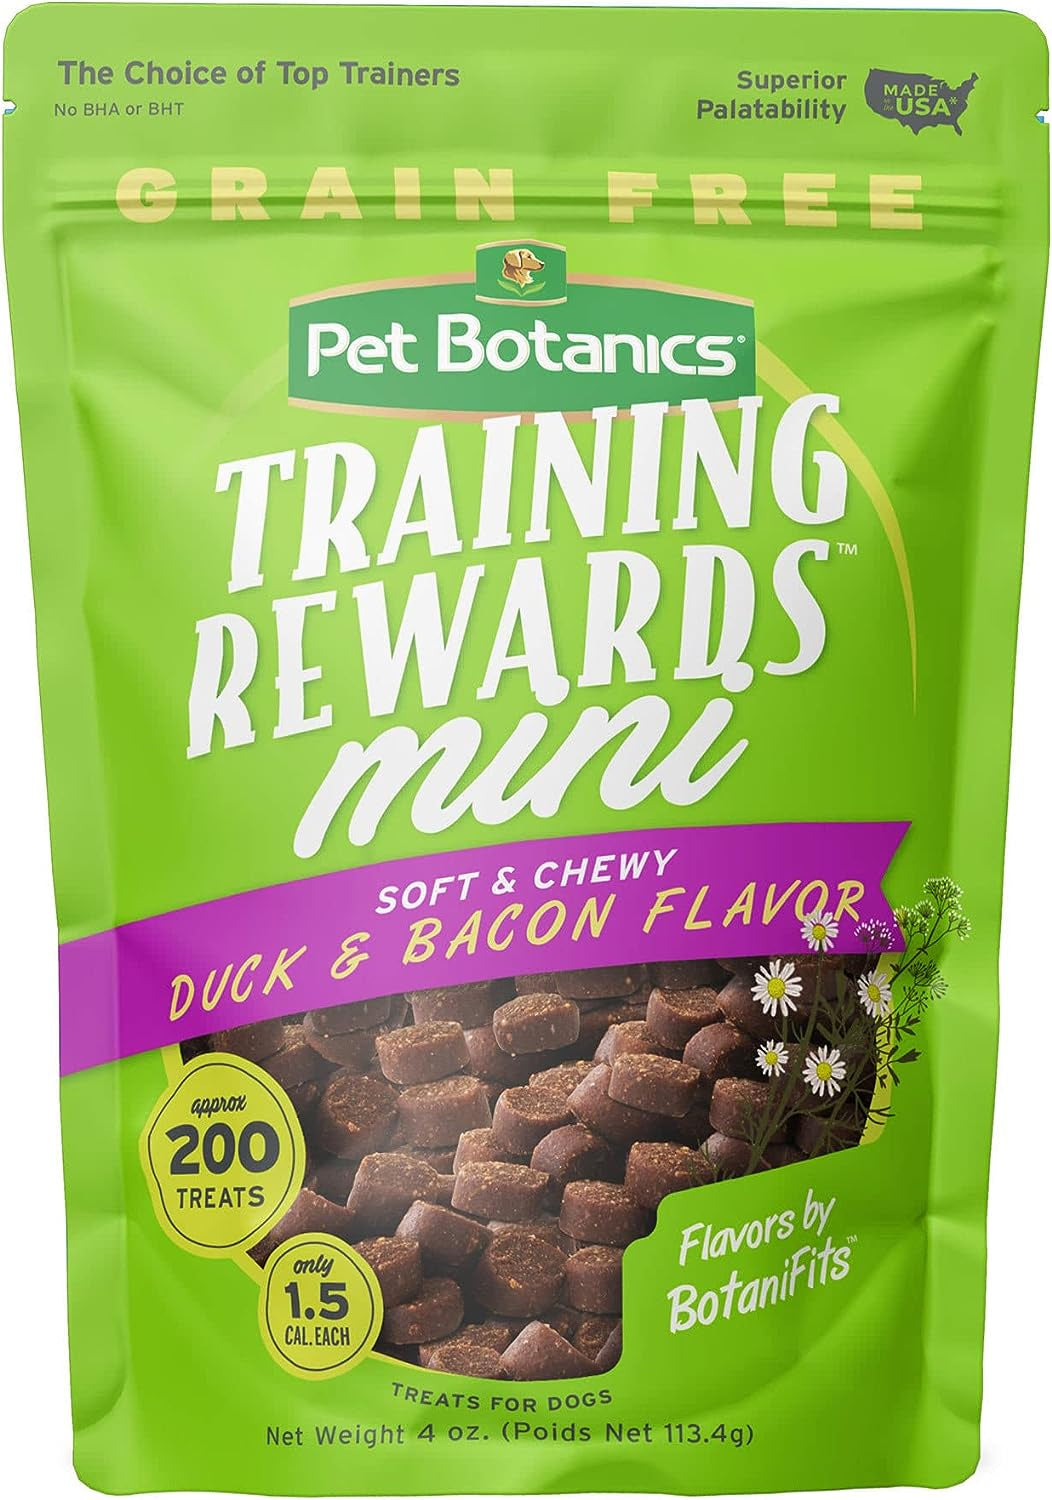 10 Oz. Pouch Training Reward Mini Soft & Chewy, Chicken Flavor, with 500 Treats per Bag, the Choice of Top Trainers